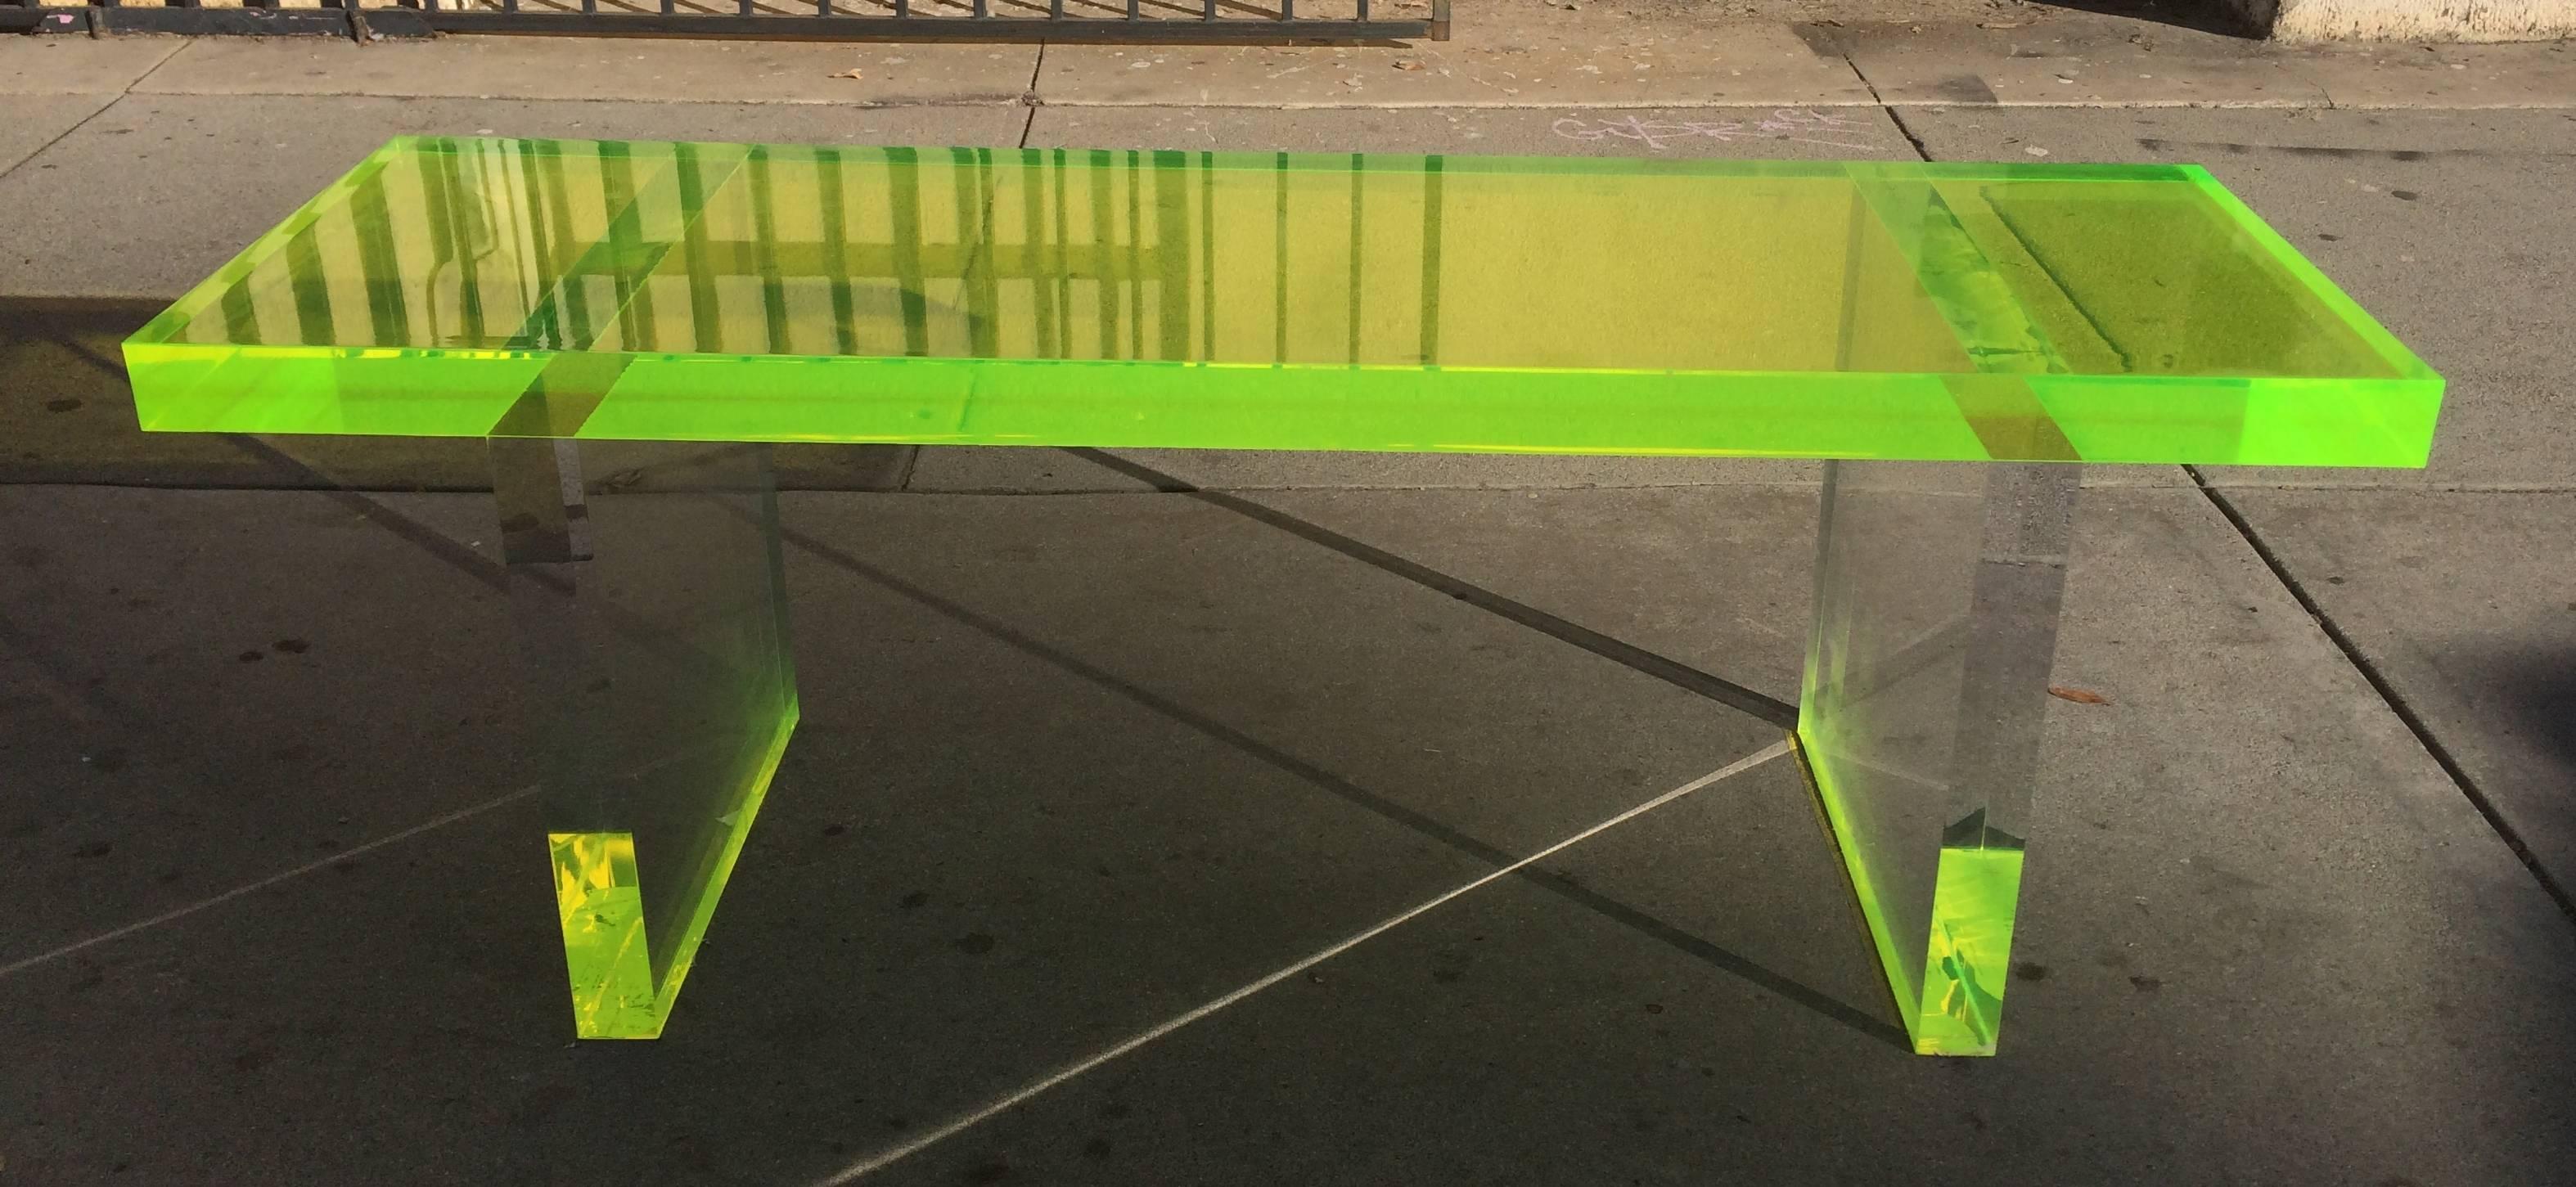 Stunning 2" thick lime green Lucite bench.
The bench is a new addition to our portfolio and it can be made to order in a color of your choice (blue, green, red, orange, yellow) we can also customize the size to better fit your needs.
Lead time